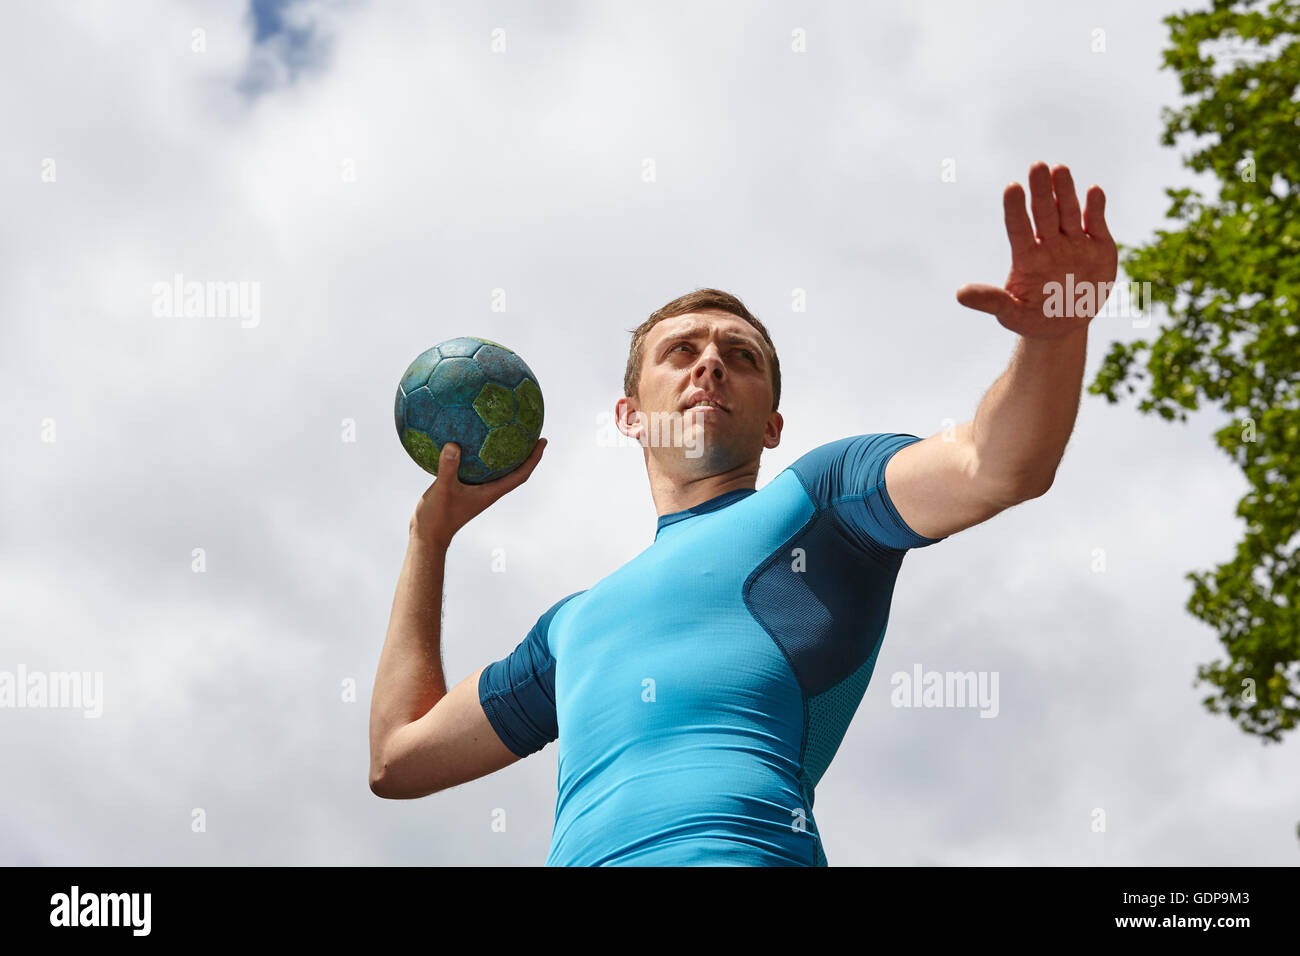 Low angle view of young male handball player preparing to throw ball Stock Photo